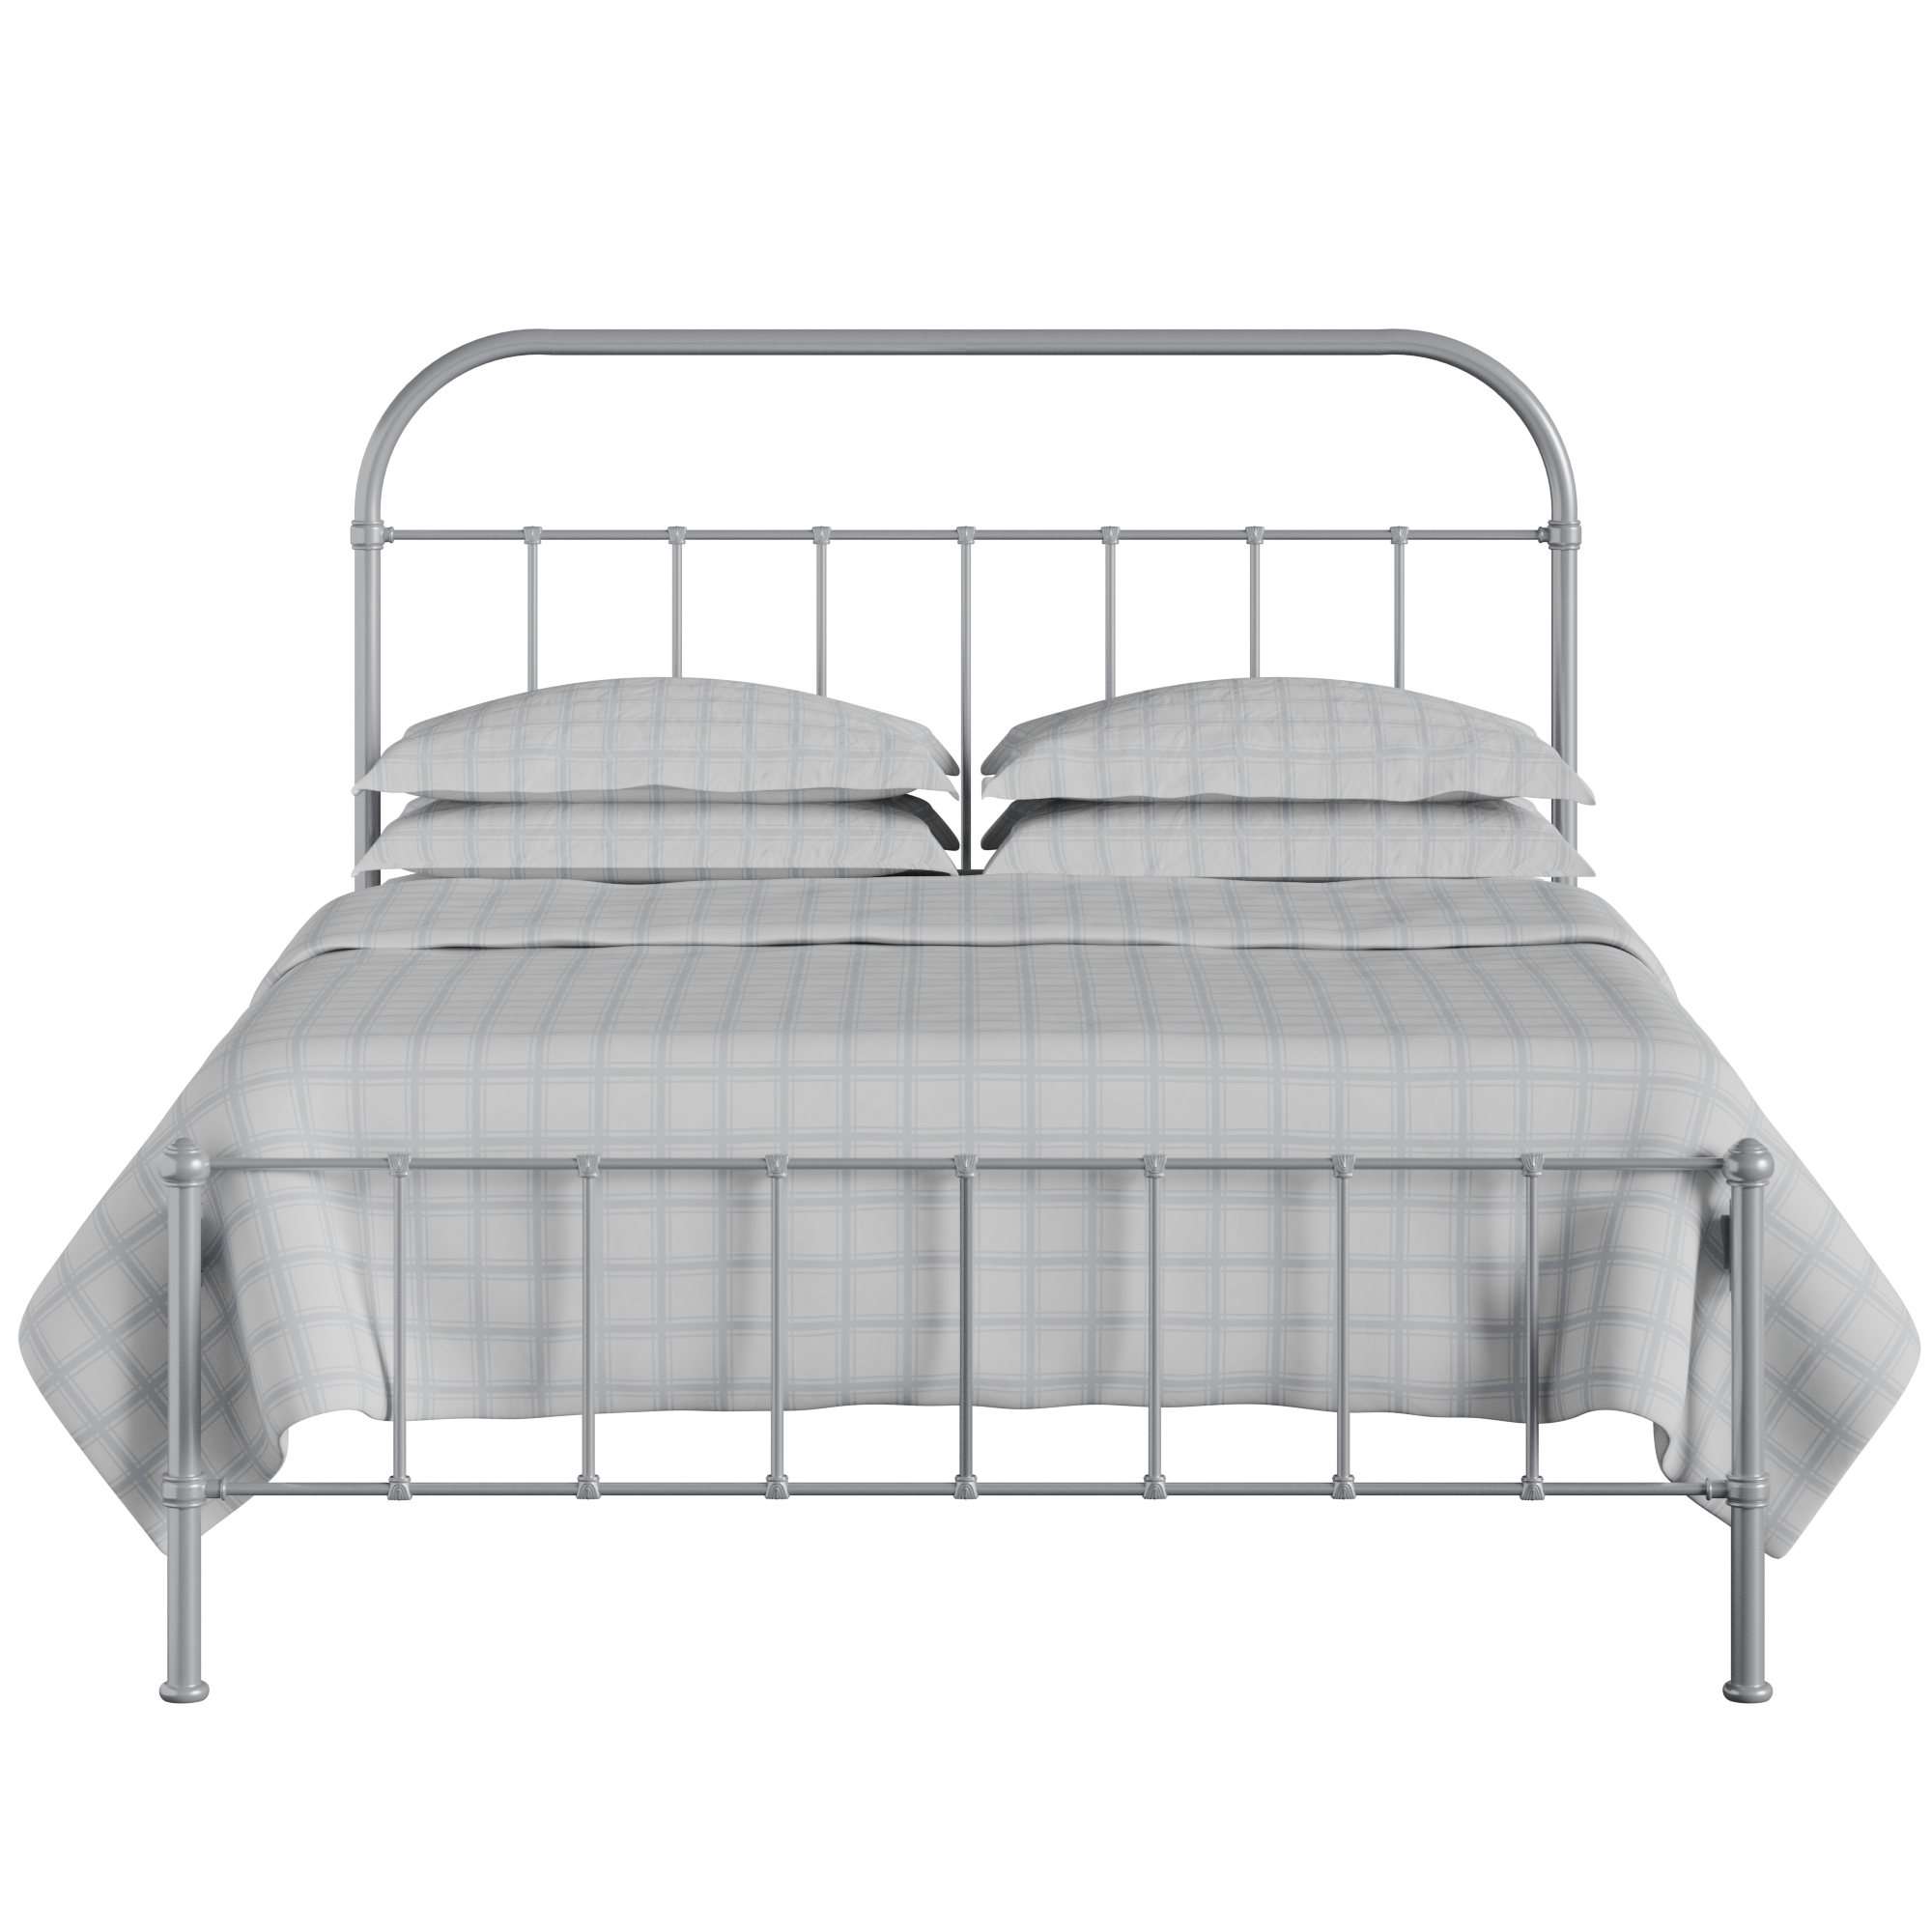 Solomon iron/metal bed in silver